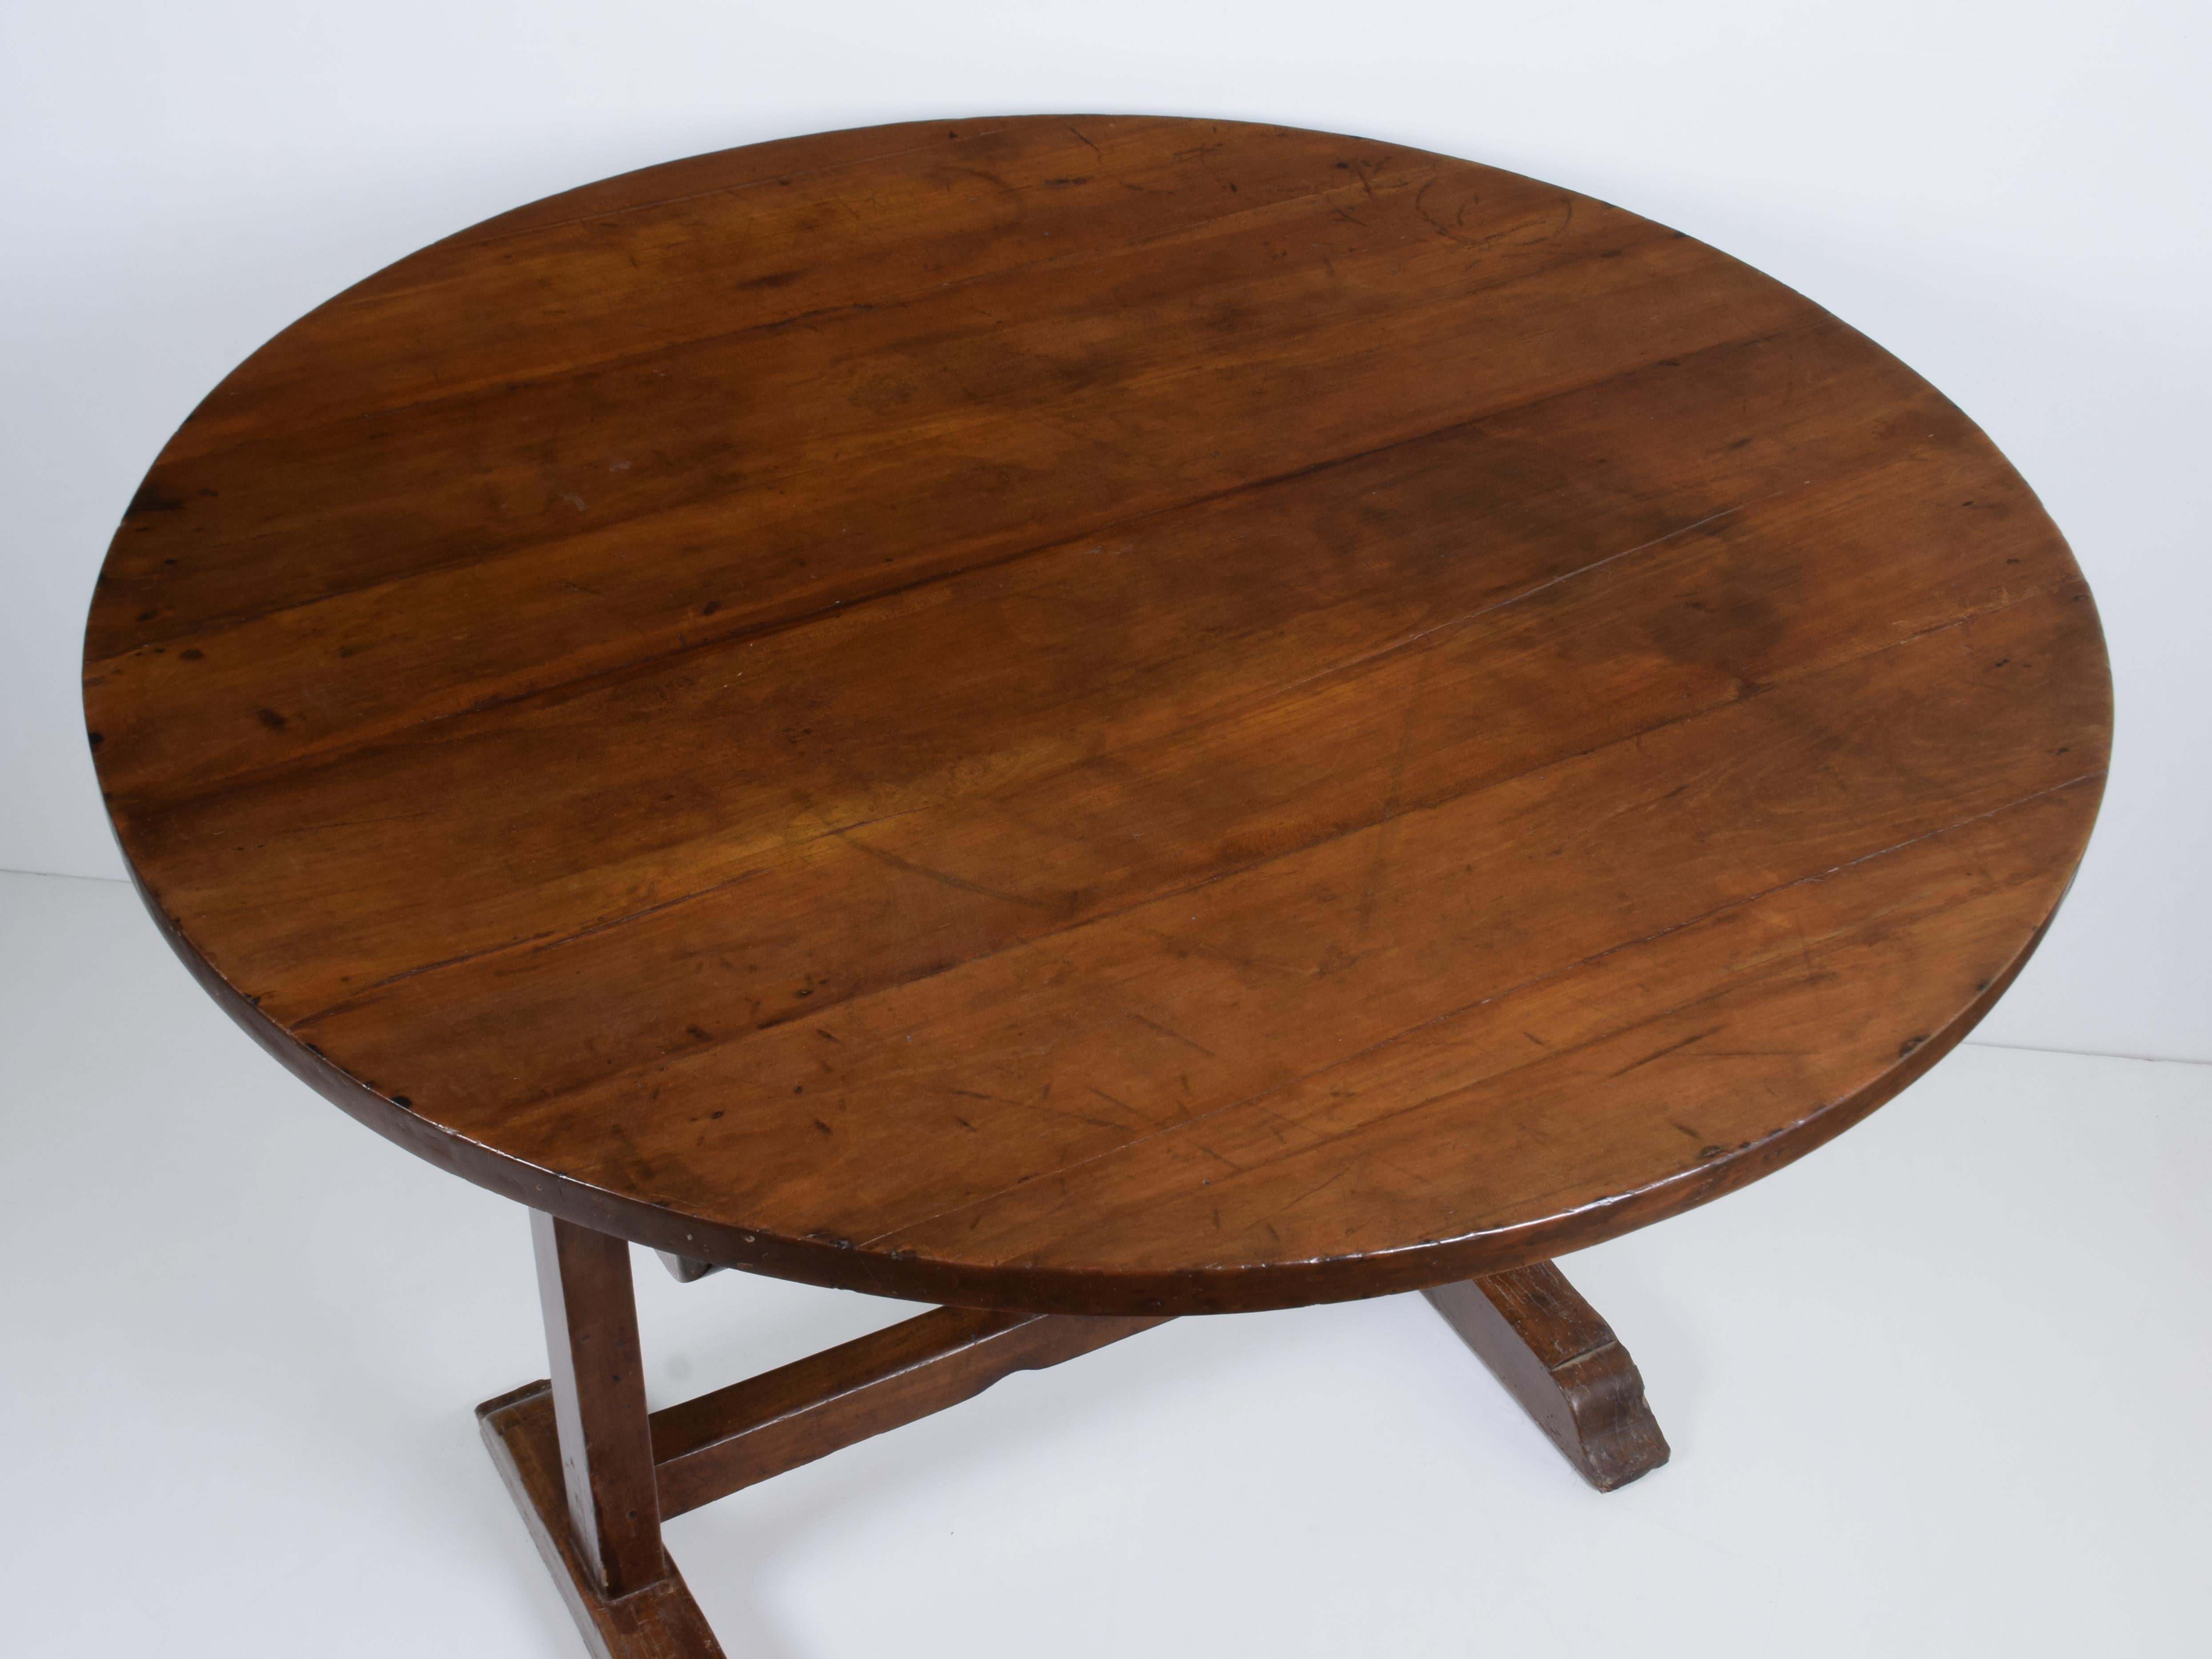 Wine Tasting Tilt-Top Cherry Table, Italy, Early 19th Century For Sale 3